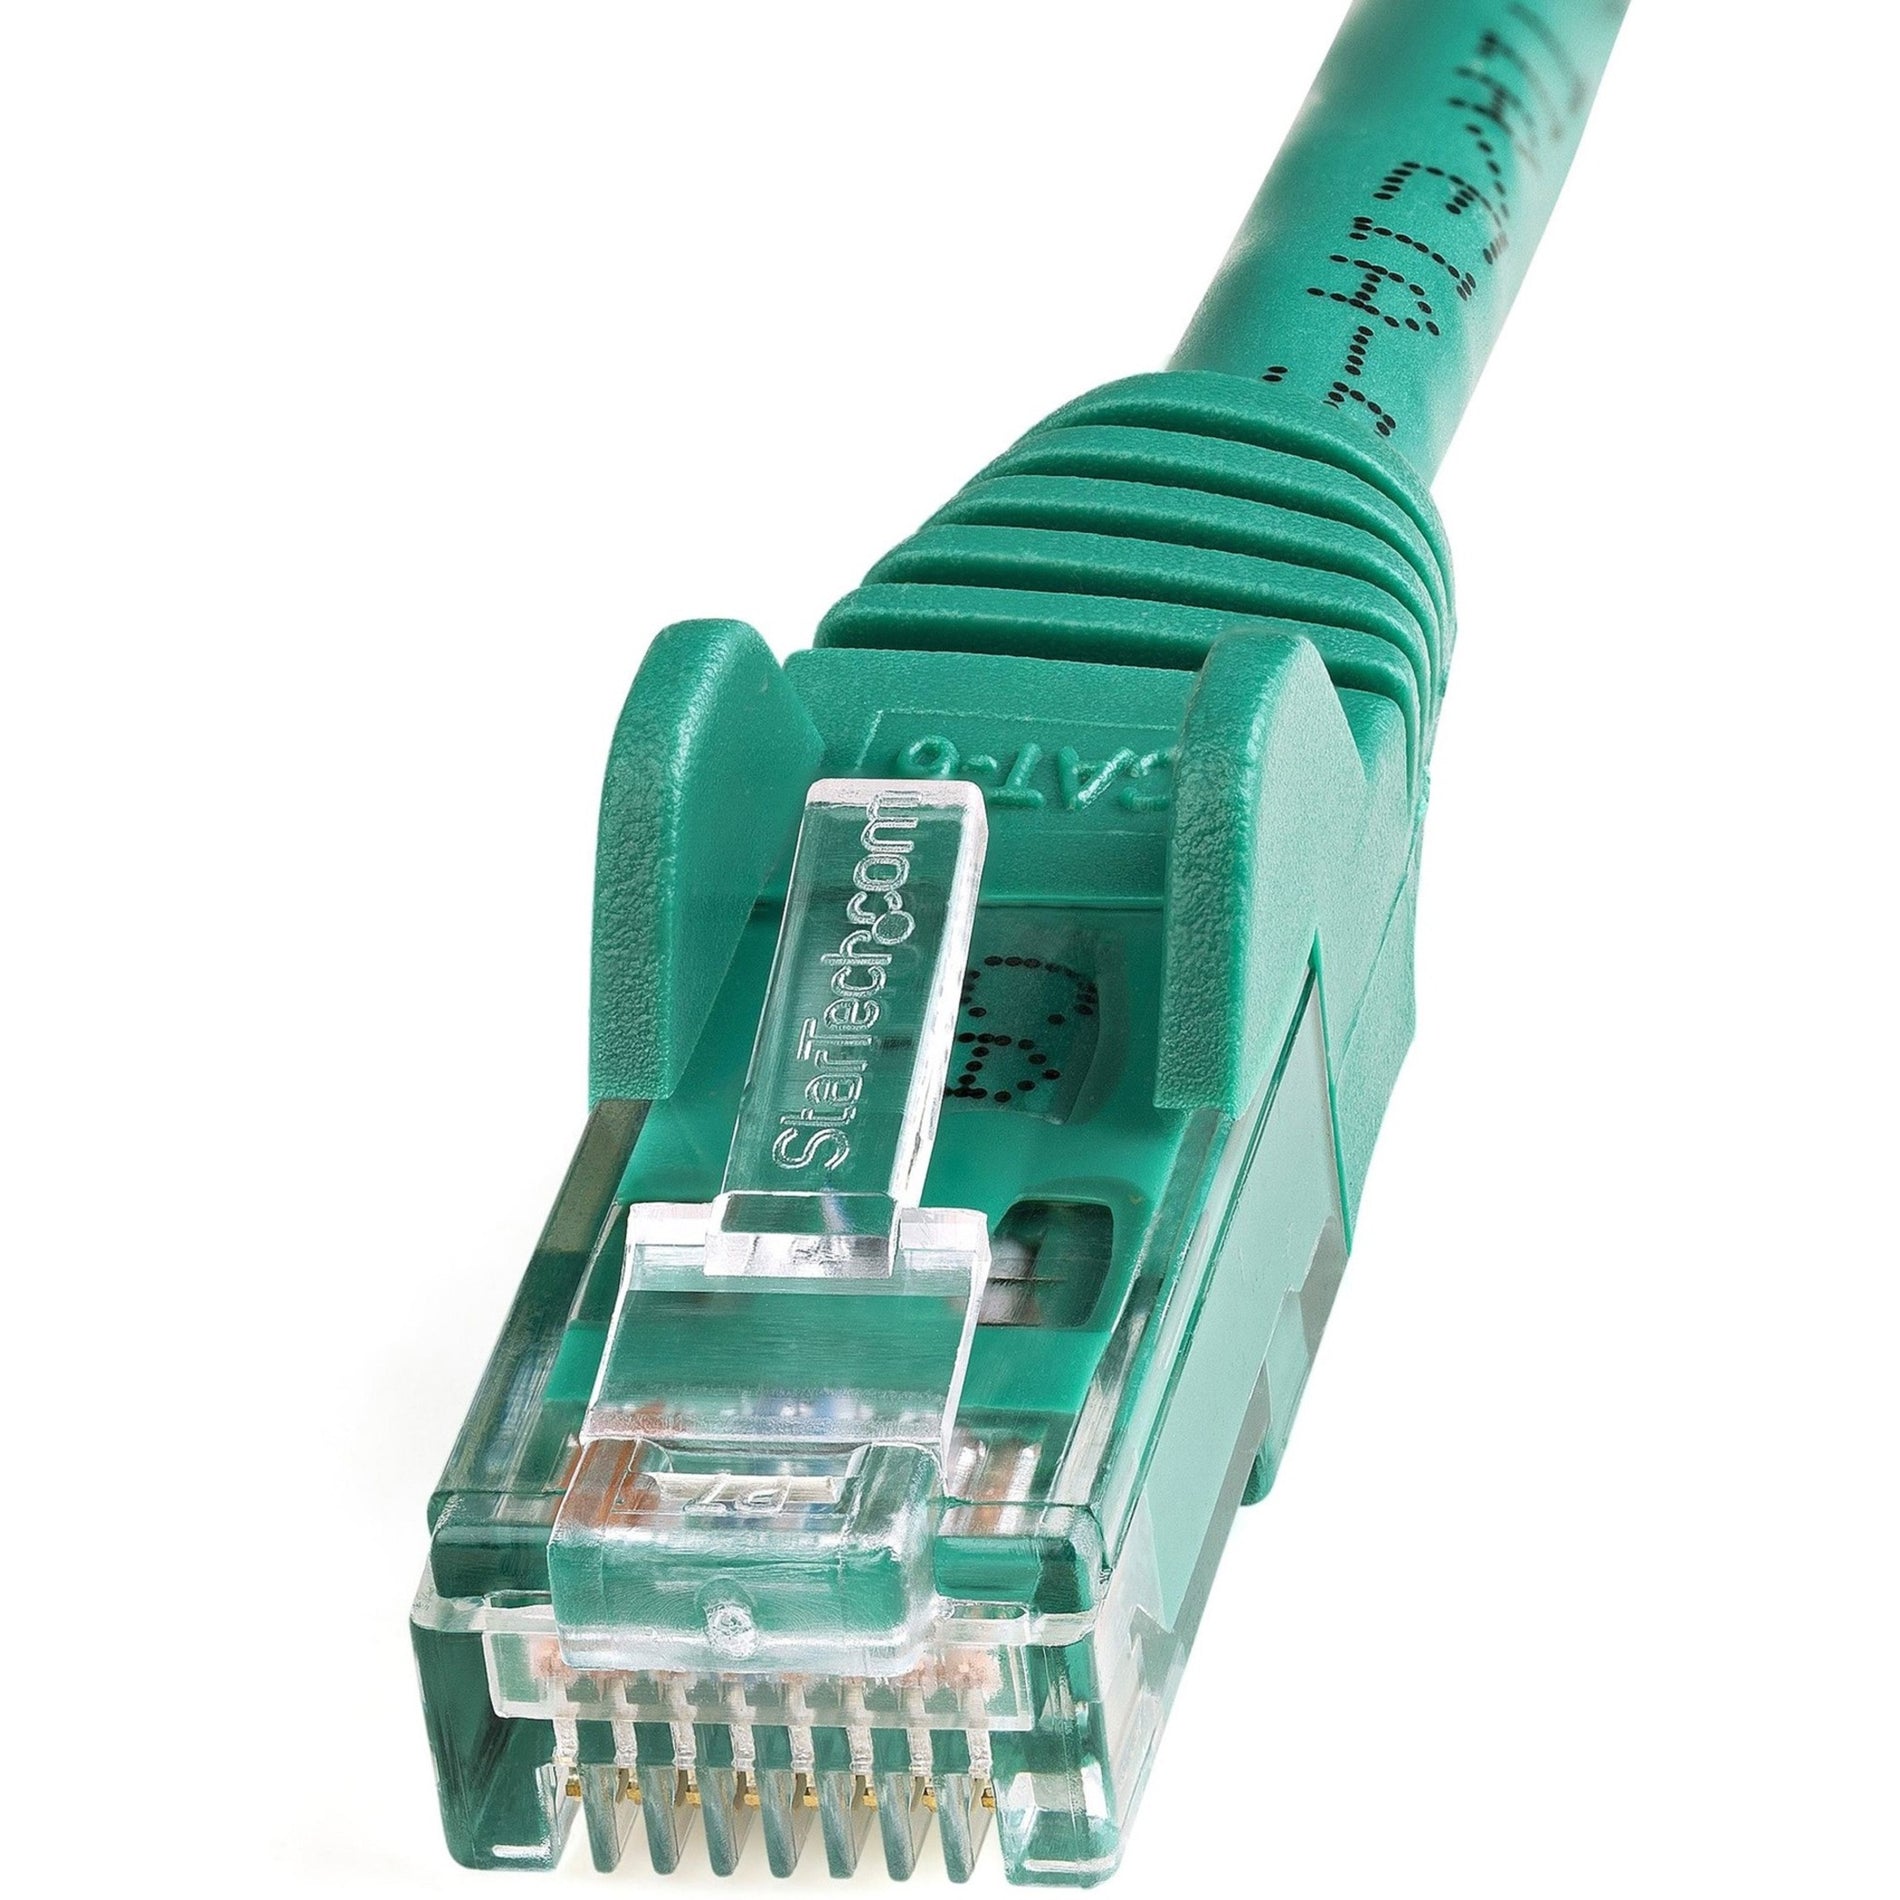 StarTech.com N6PATCH6INGN Cat6 Patch Cable, 6in Green, Short Ethernet Cable